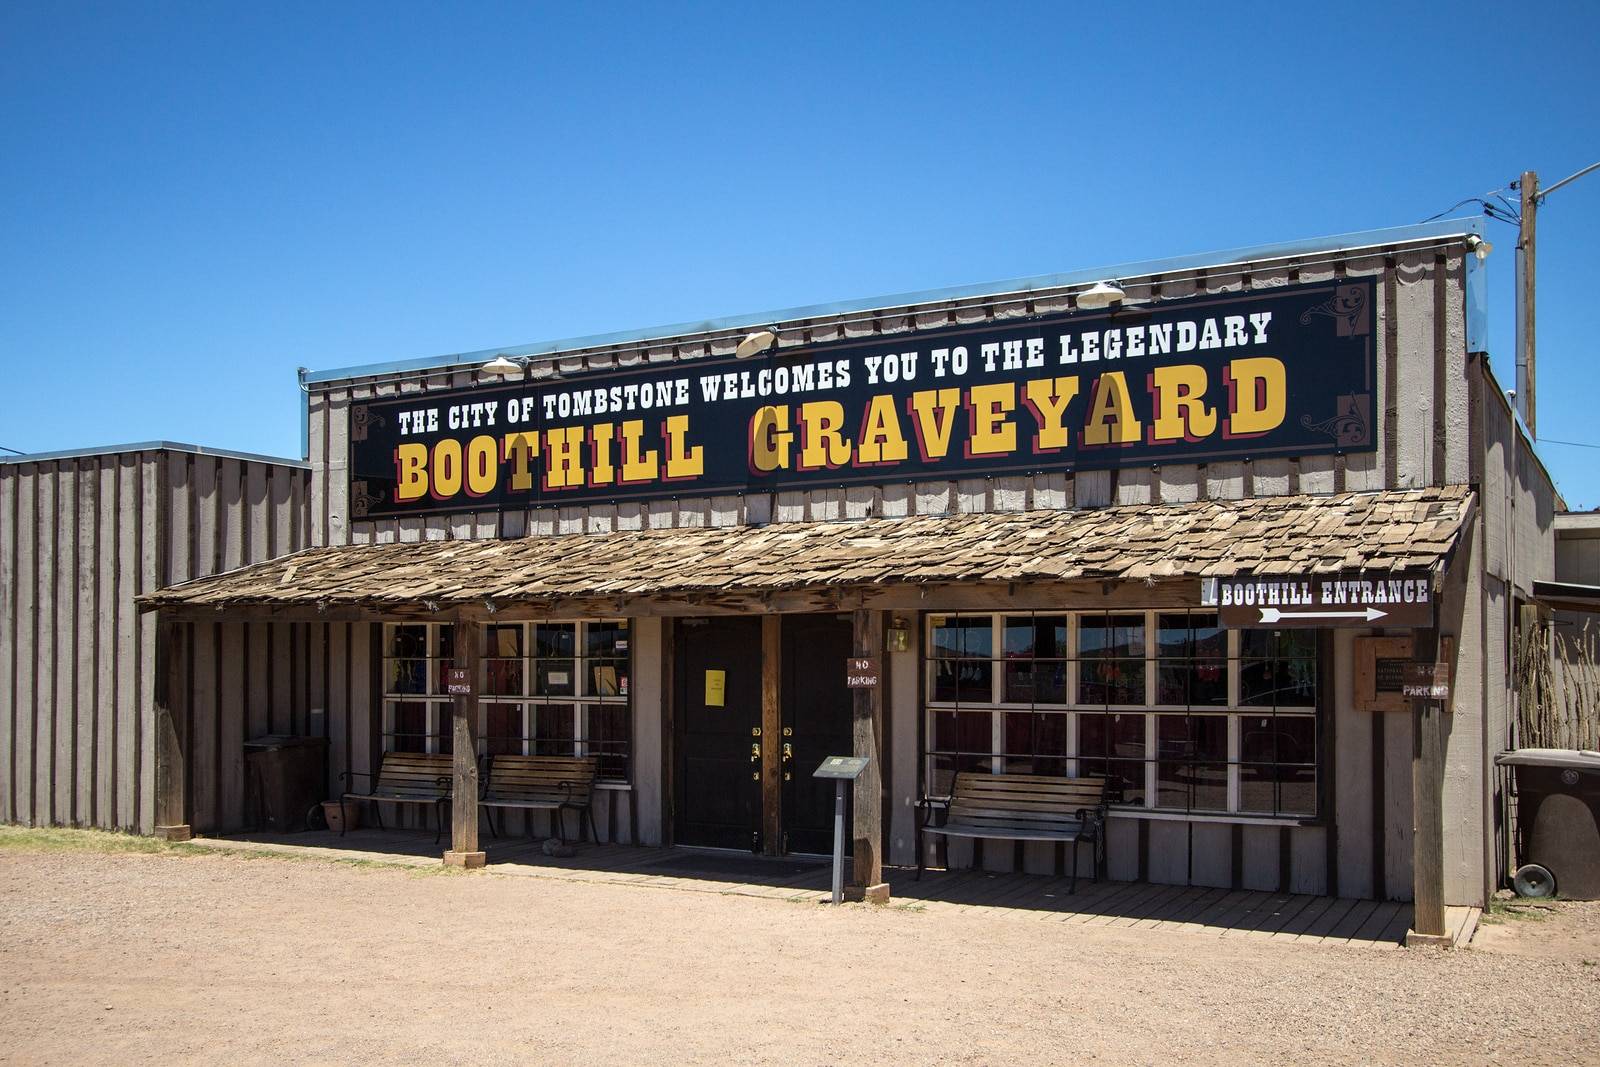 Entrance to the famous Boothill Graveyard in Tombstone Arizona